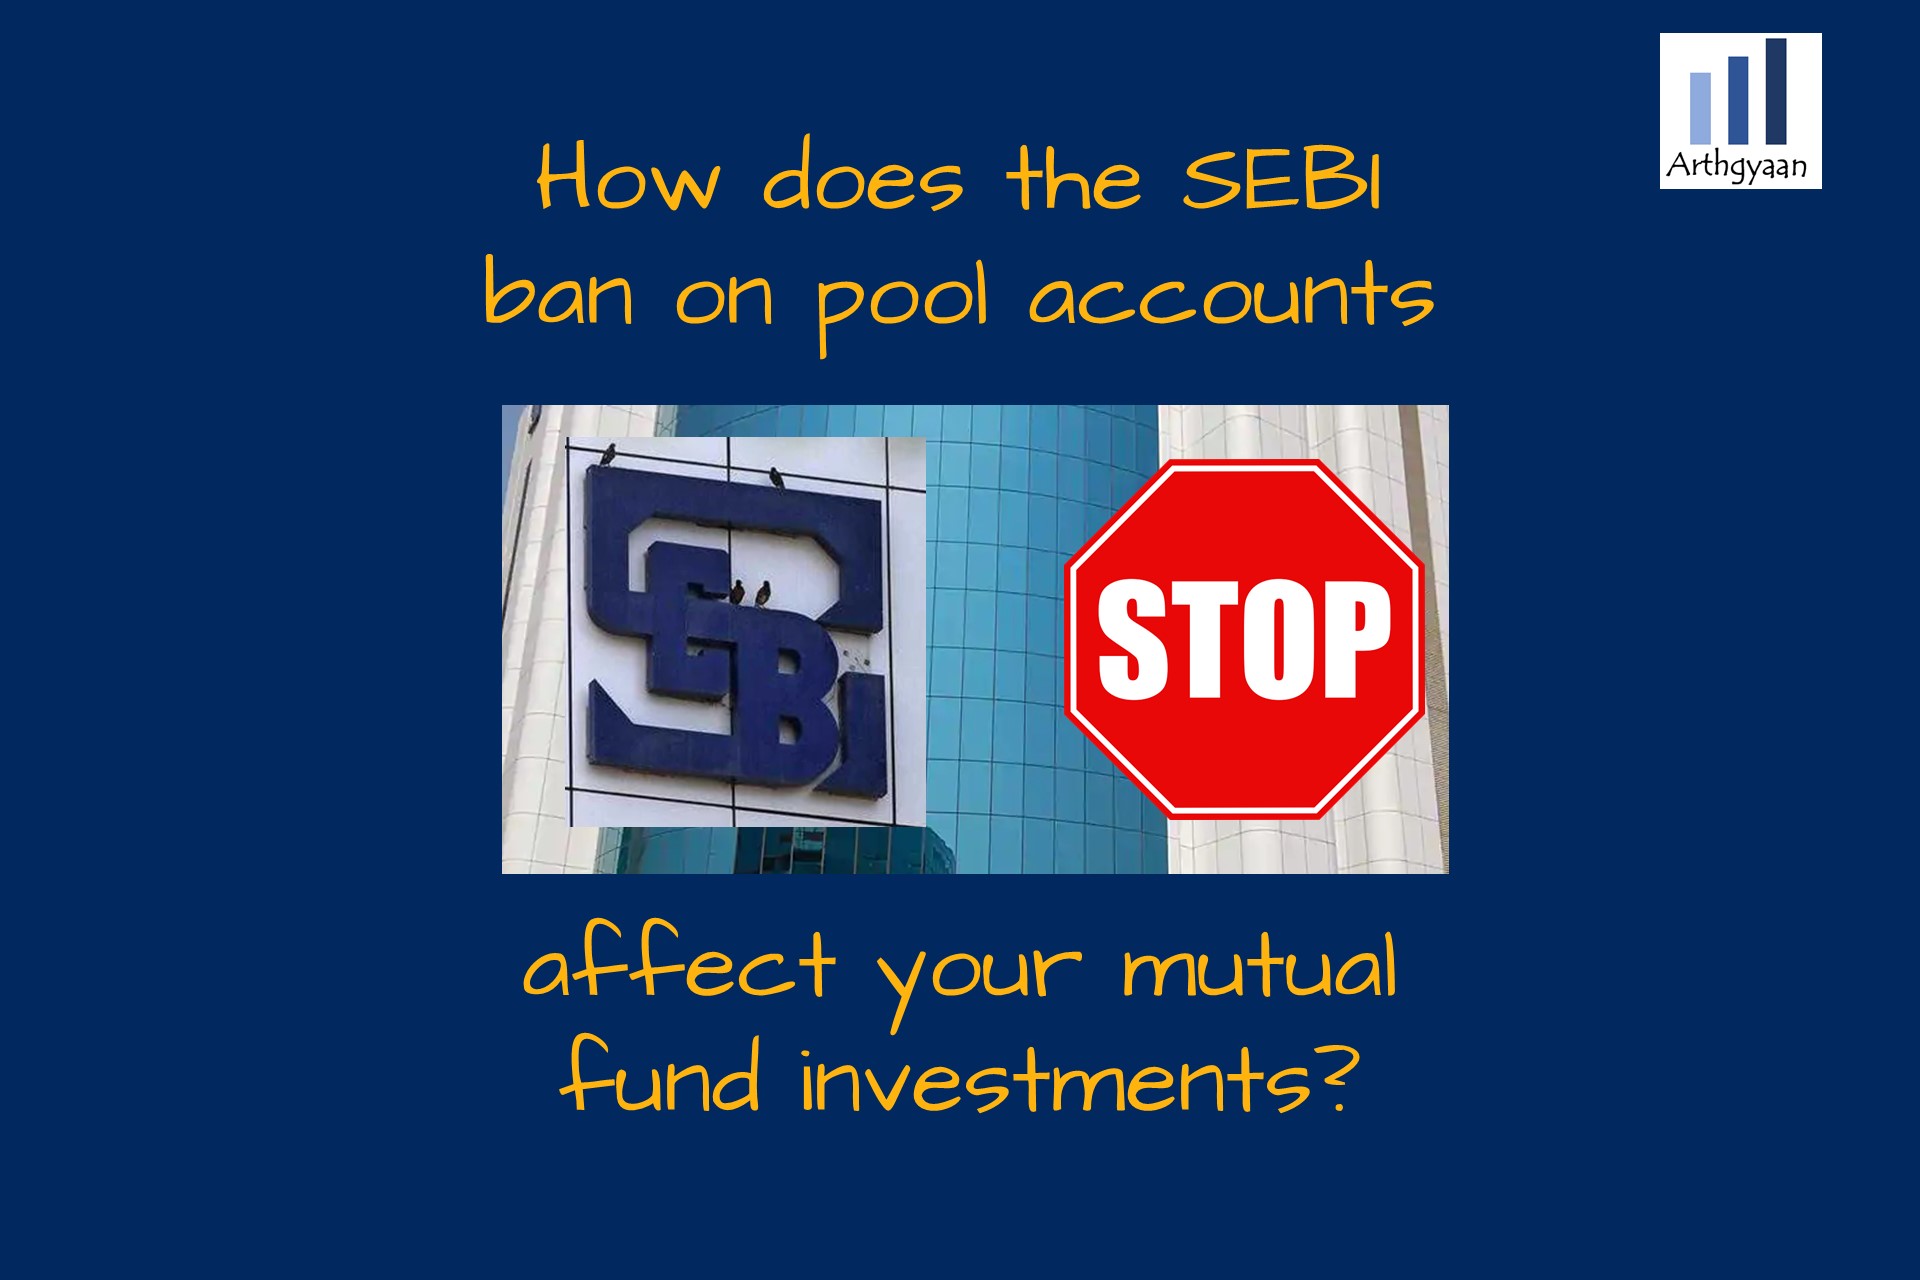 How does the SEBI ban on pool accounts affect your mutual fund investments?